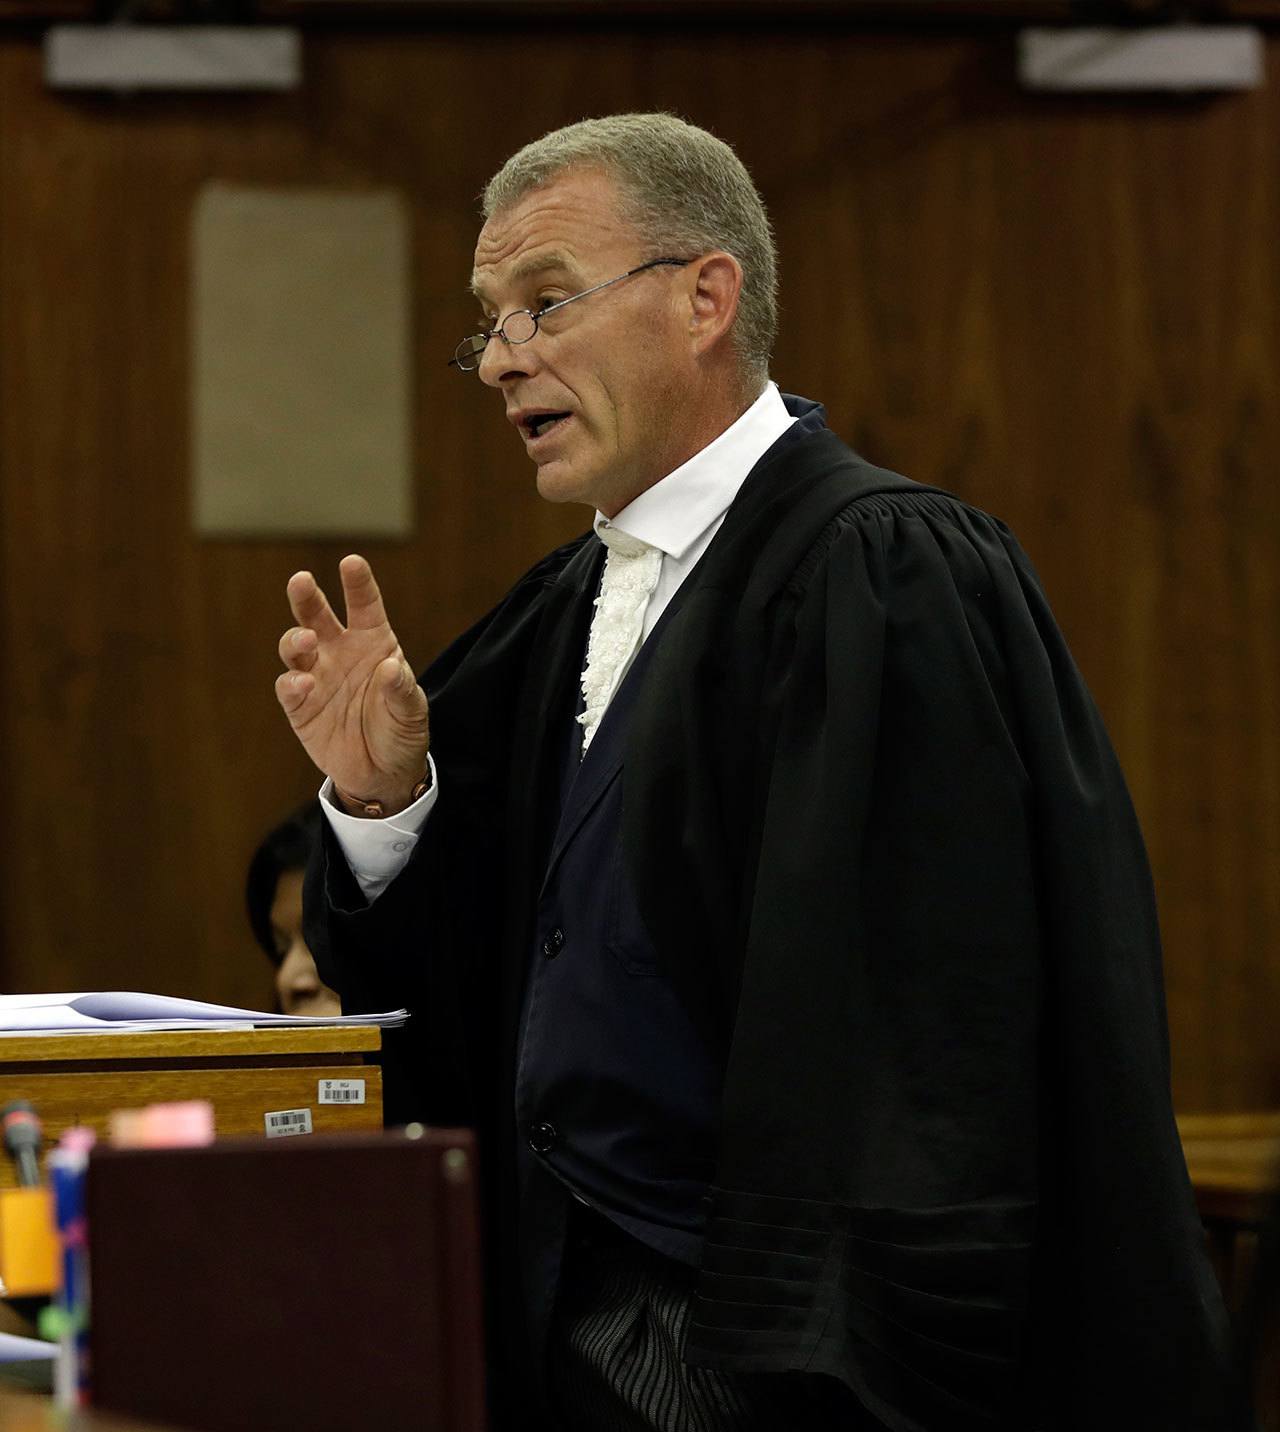 South African chief state prosecutor Gerrie Nel speaks during the state appeal against Oscar Pistorius’s six-year murder sentence Friday at the high court in Johannesburg, South Africa. (AP Photo/Themba Hadebe, Pool)